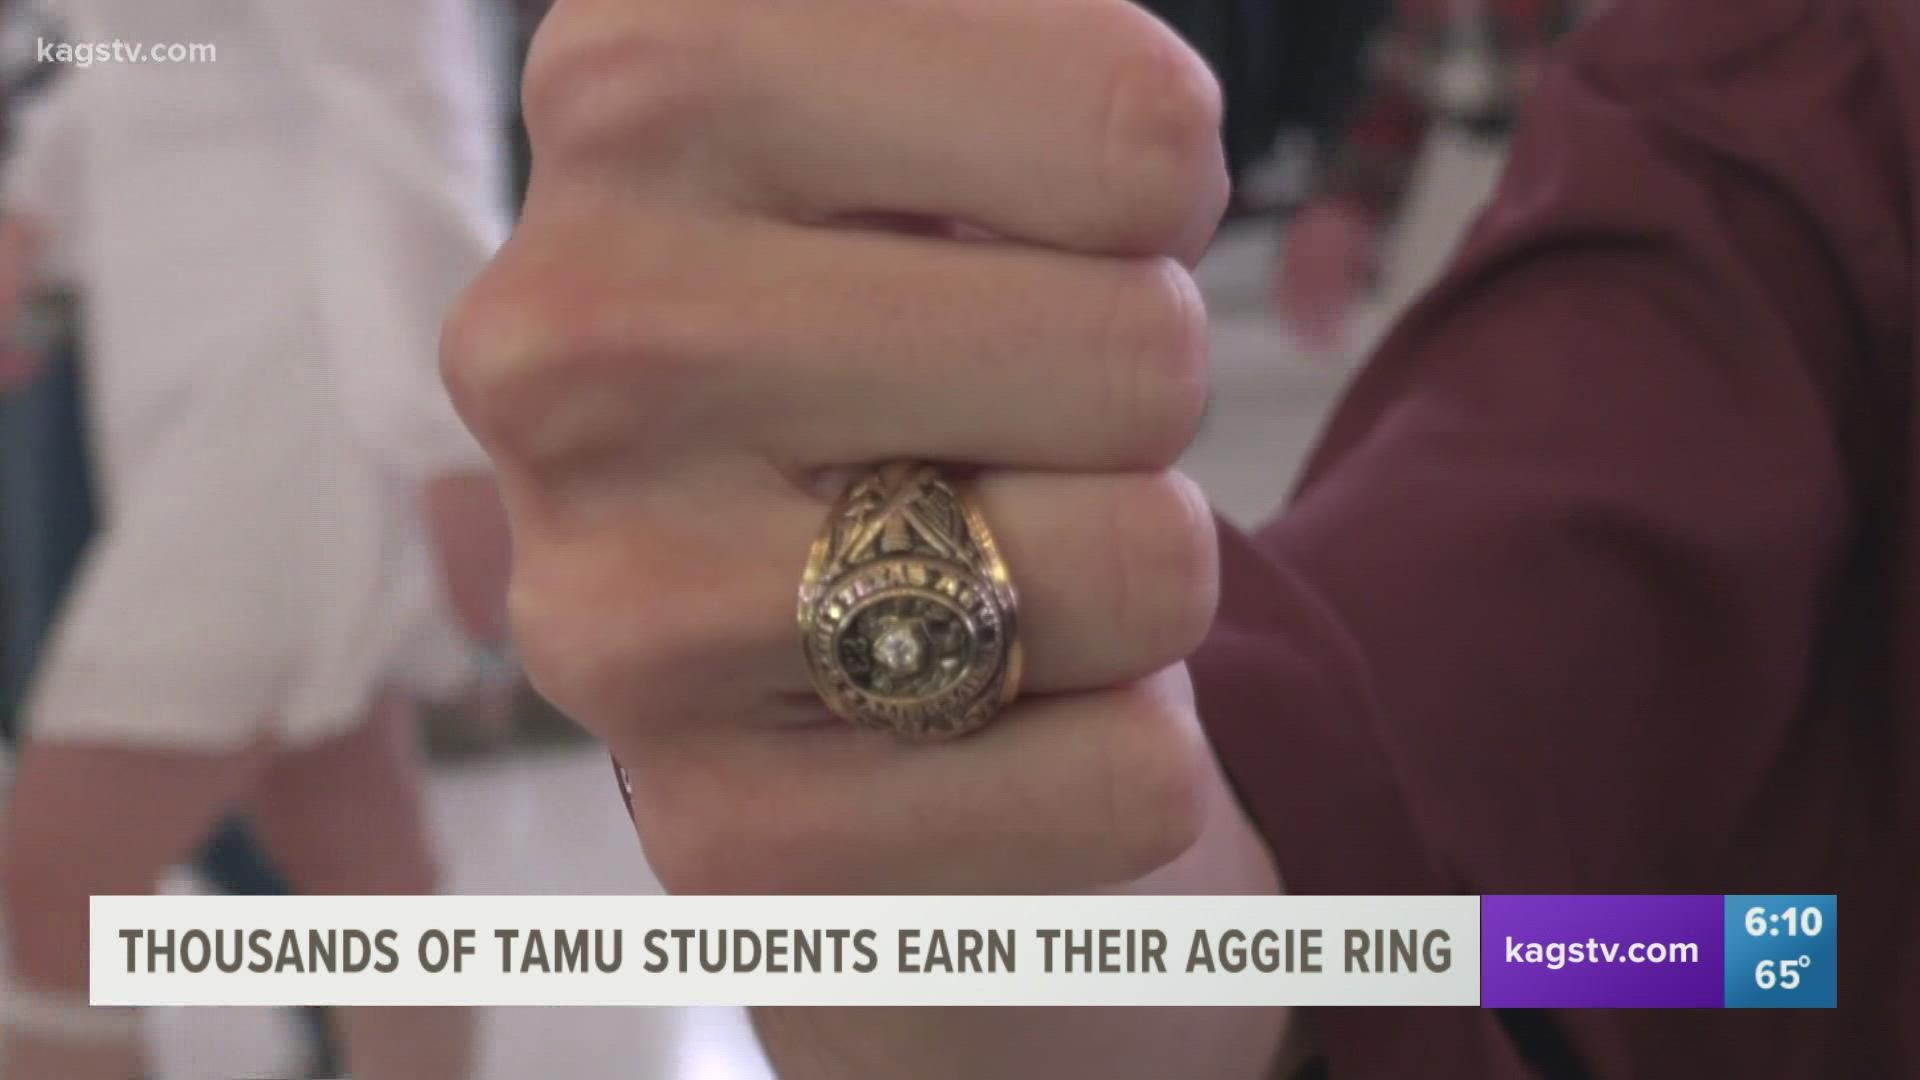 Over 2,000 students received their first ring